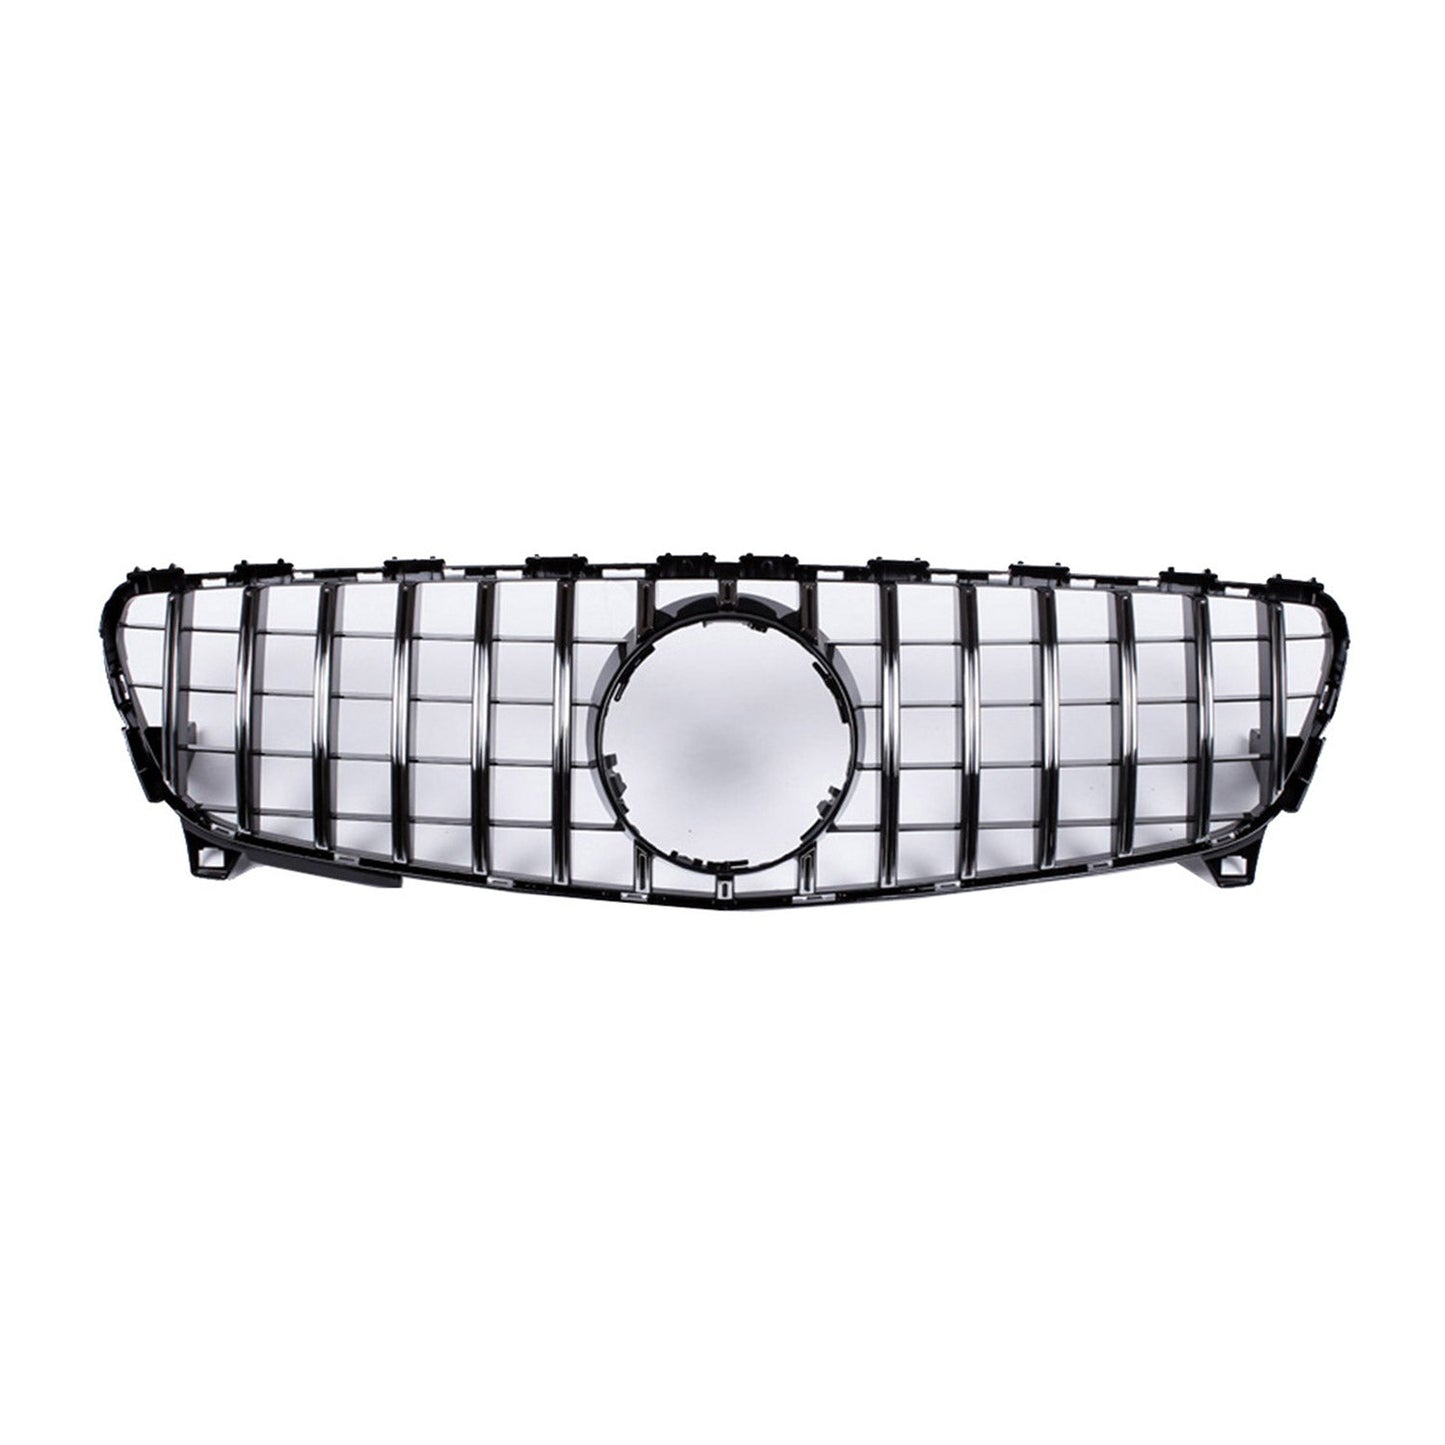 OMAC Front Bumper Grille for Mercedes A Class W176 2013-2018 GT Silver 4747P082GTS